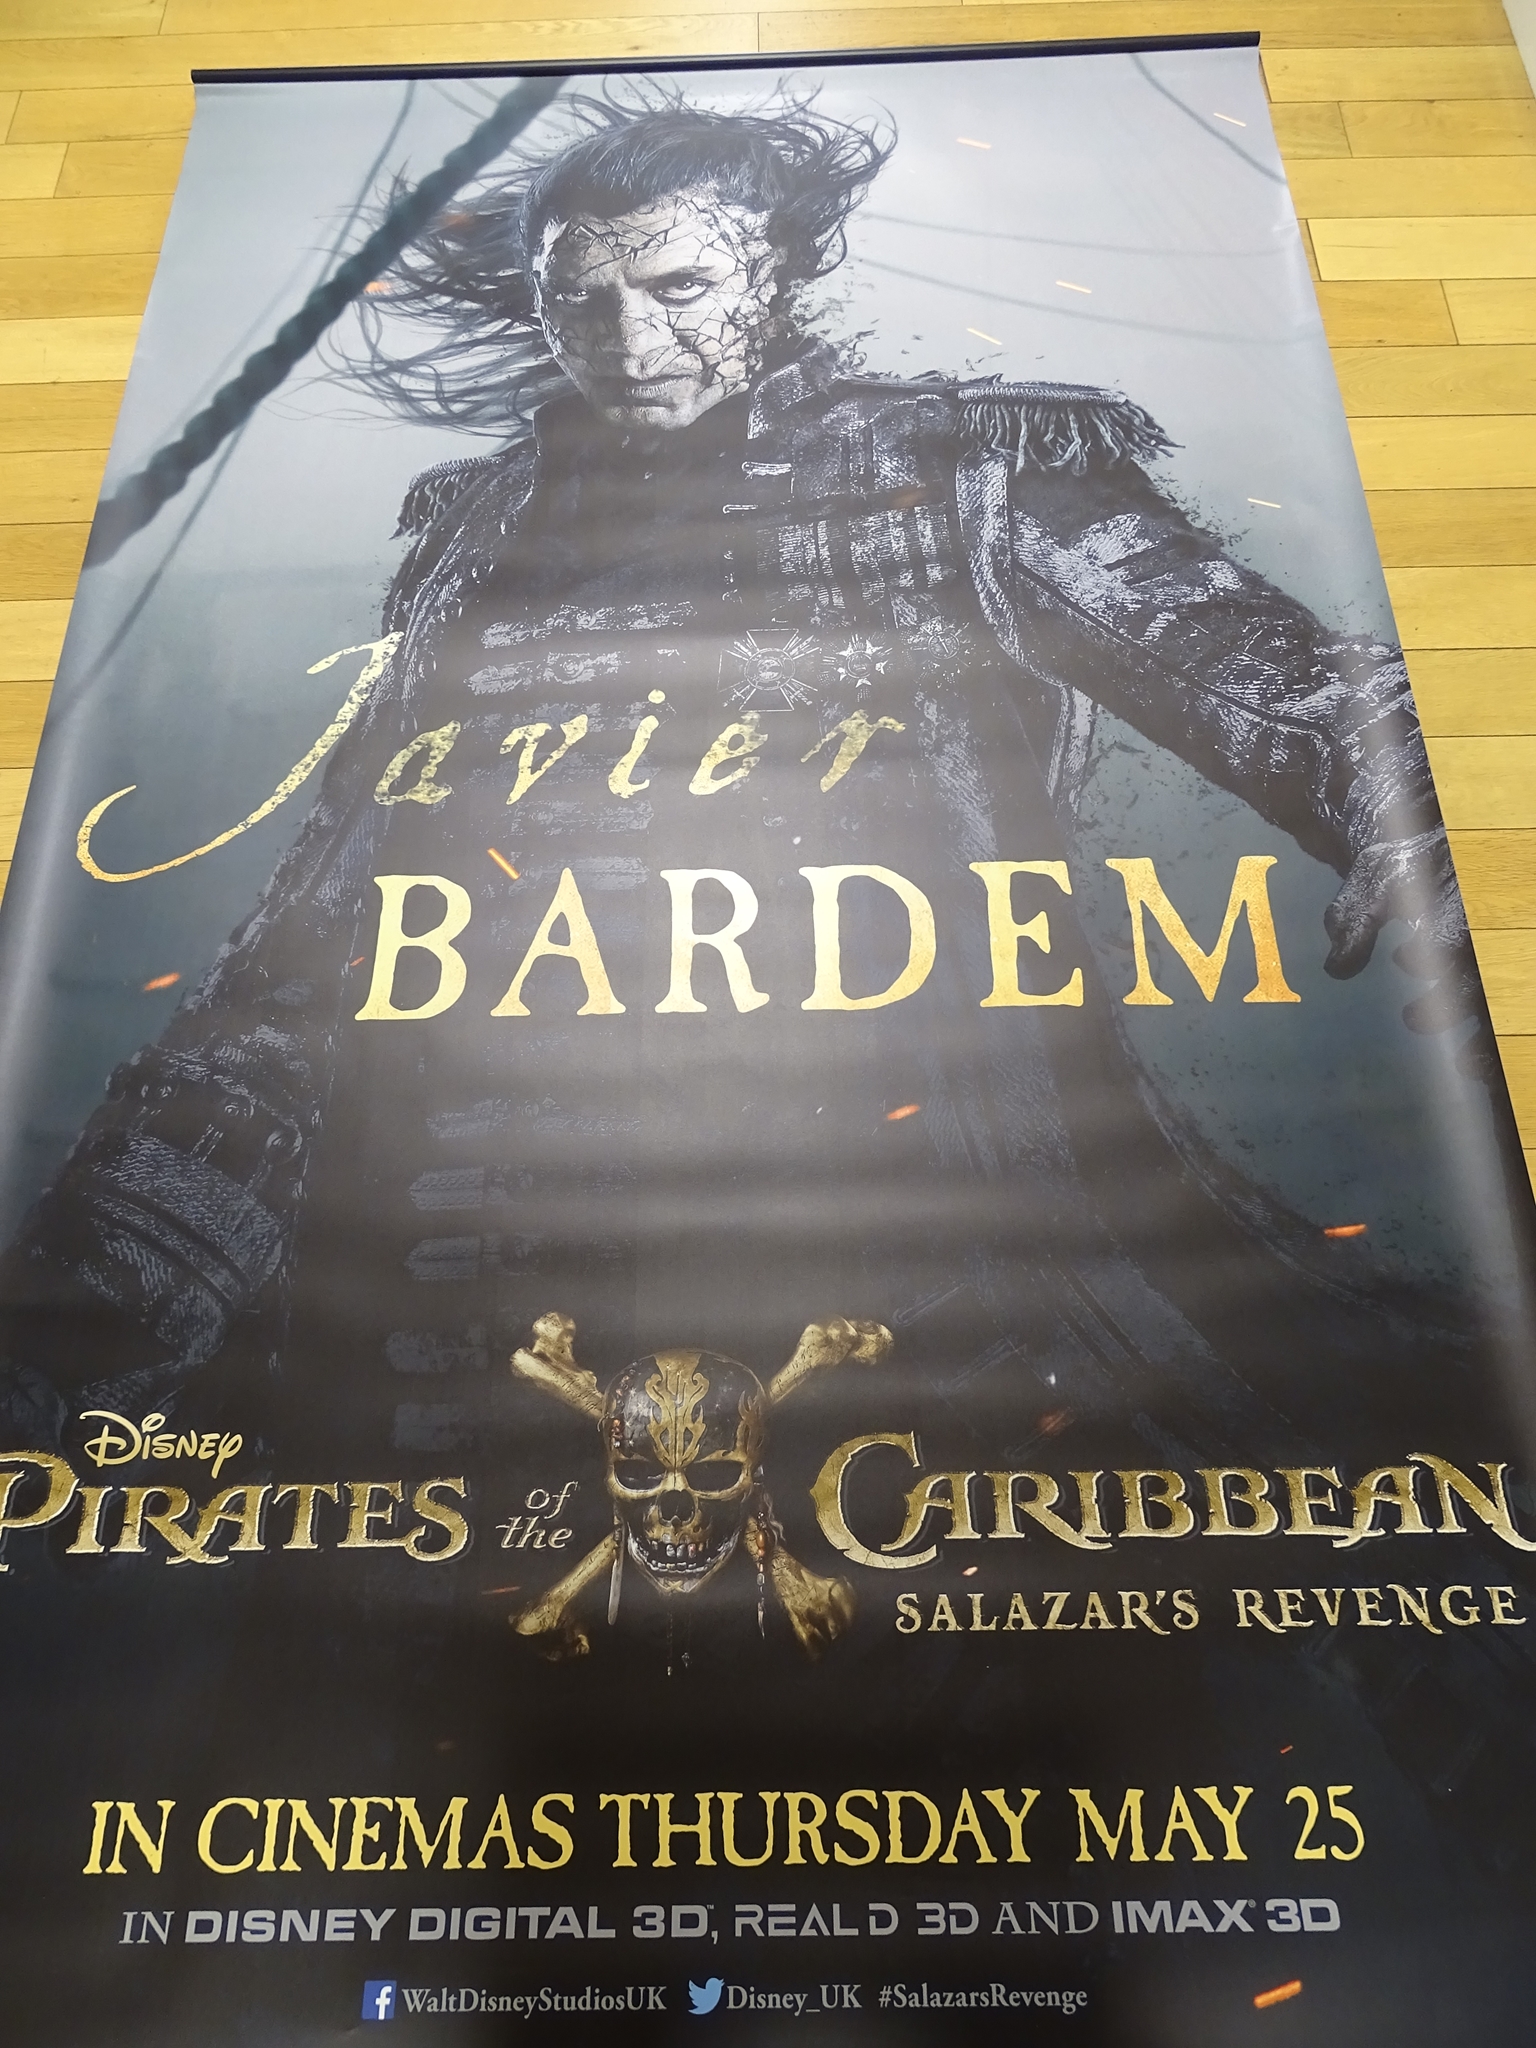 Lot x 6 Vinyl Banners: PIRATES OF THE CARIBBEAN - SALAZAR'S REVENGE (2017) - Main Artwork (approx. - Image 6 of 6